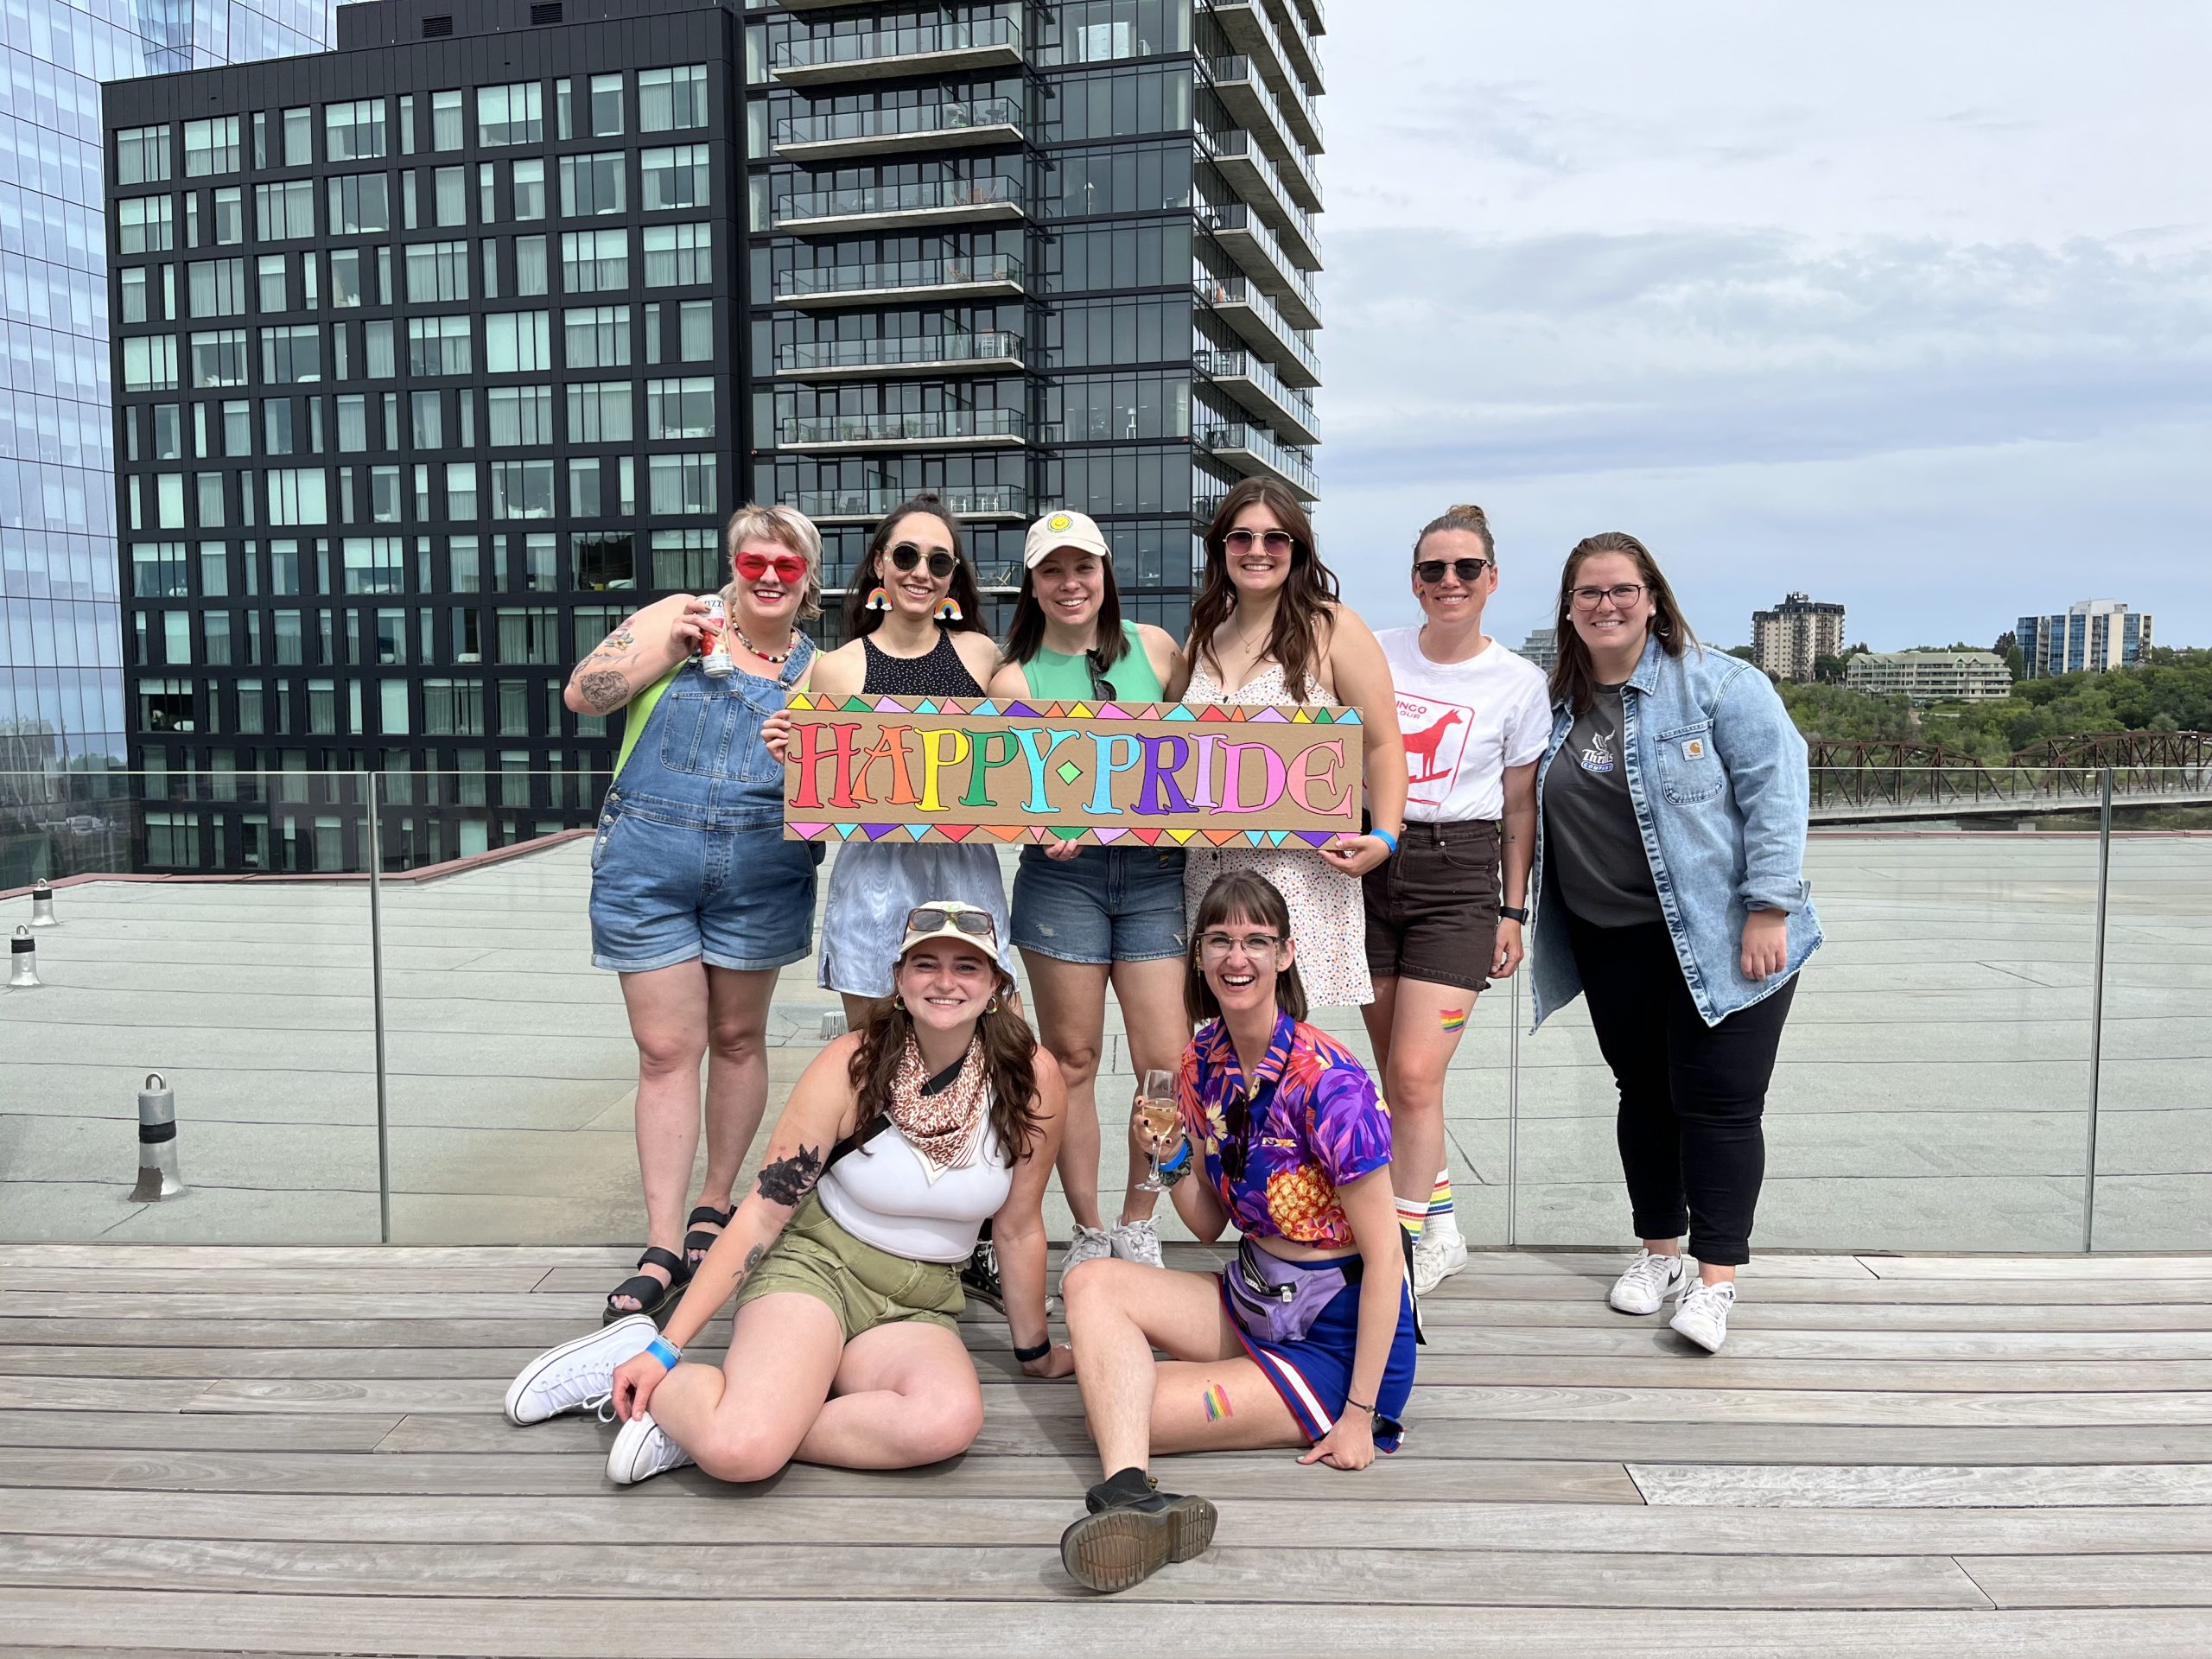 People hold a sign that says "Happy Pride" on Remai Modern's rooftop deck.